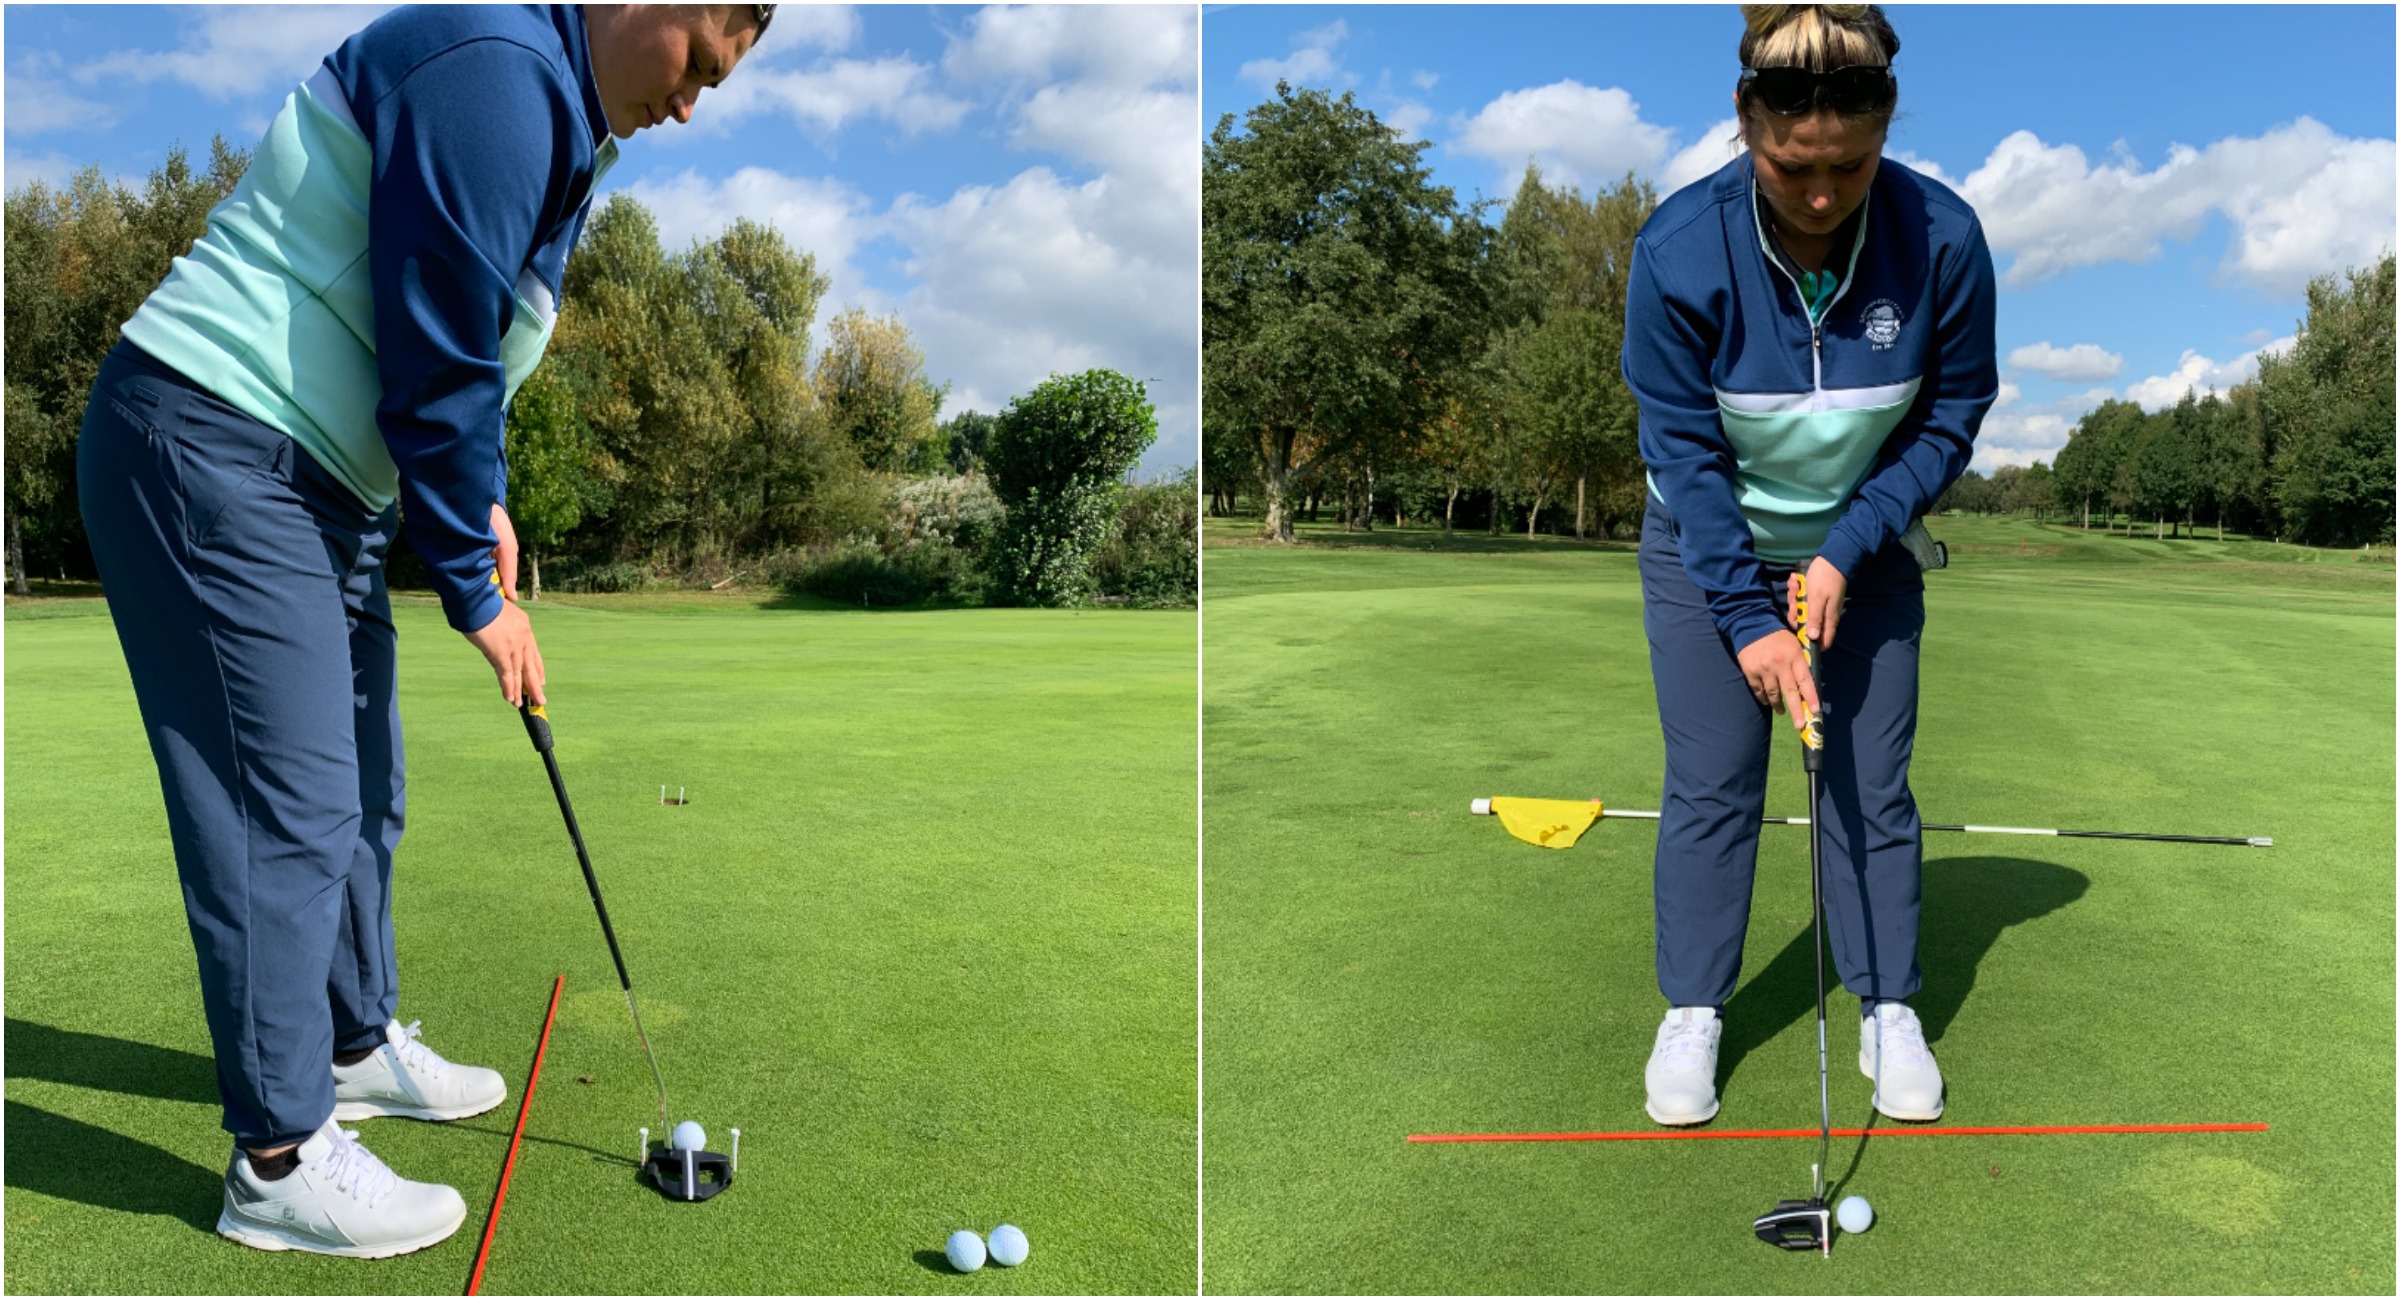 Best Golf Tips: Use the TEE PEG DRILL to improve your putting | GolfMagic